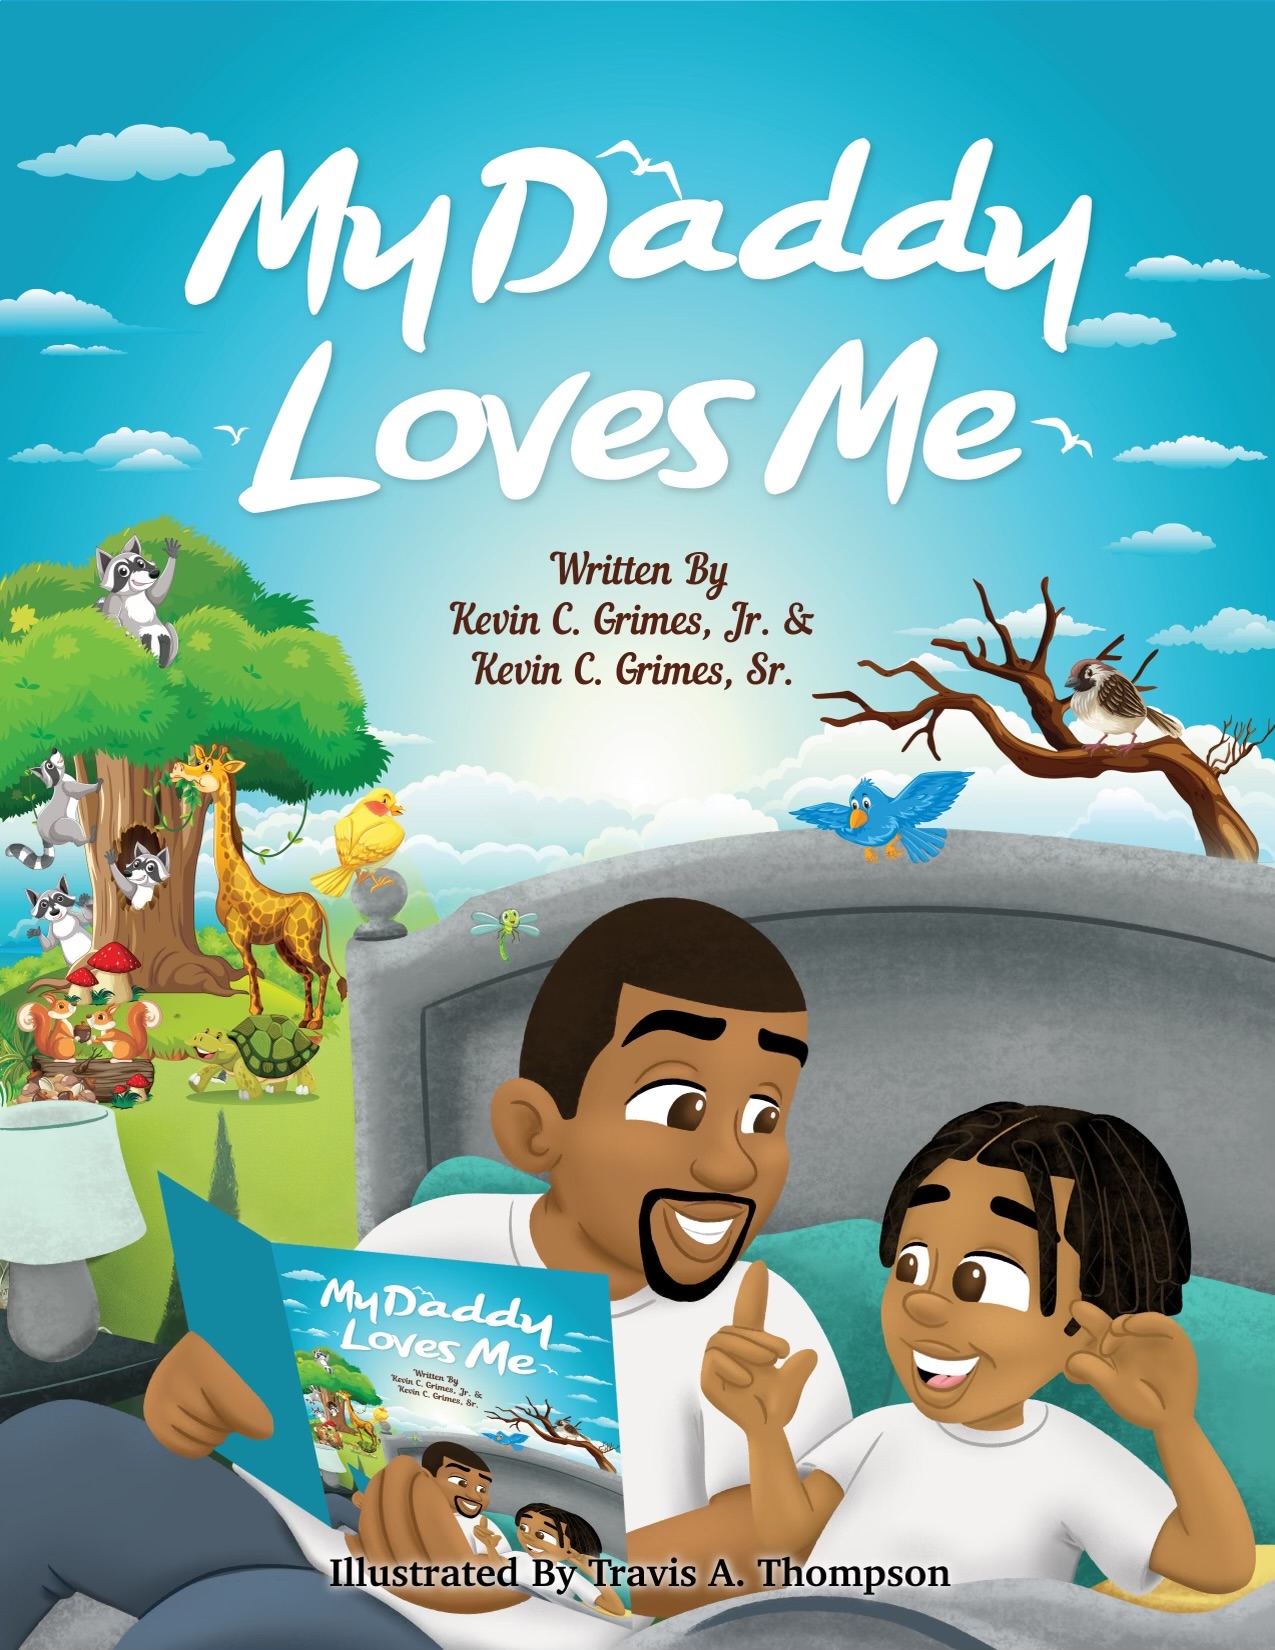 Cover of Kevin Grime's book "My Daddy Loves Me" with illustration of father reading to son.